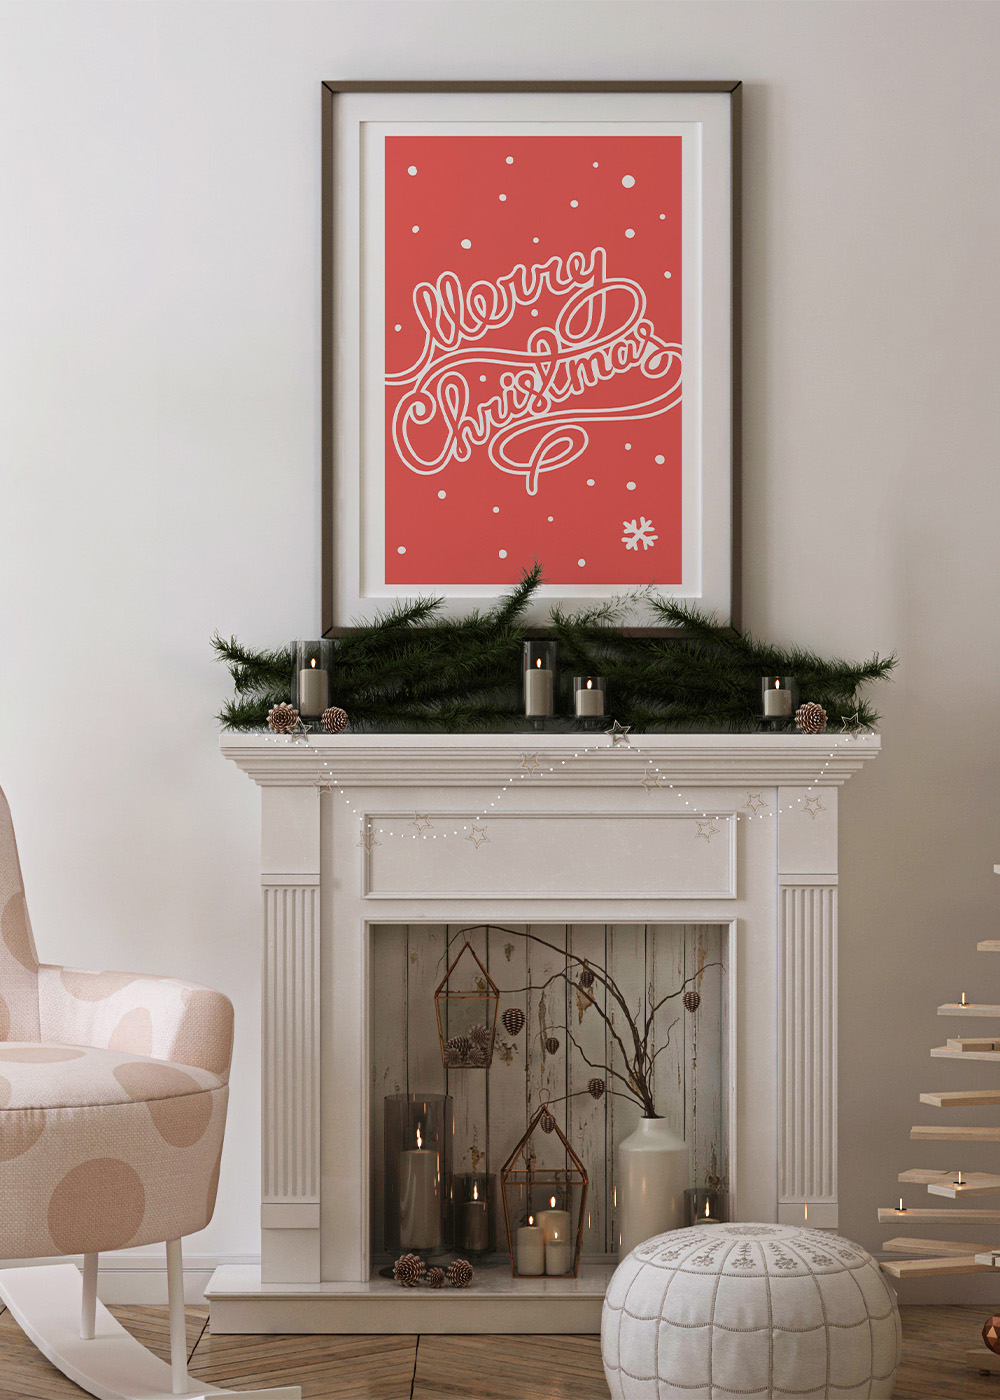 Affiche merry christmas